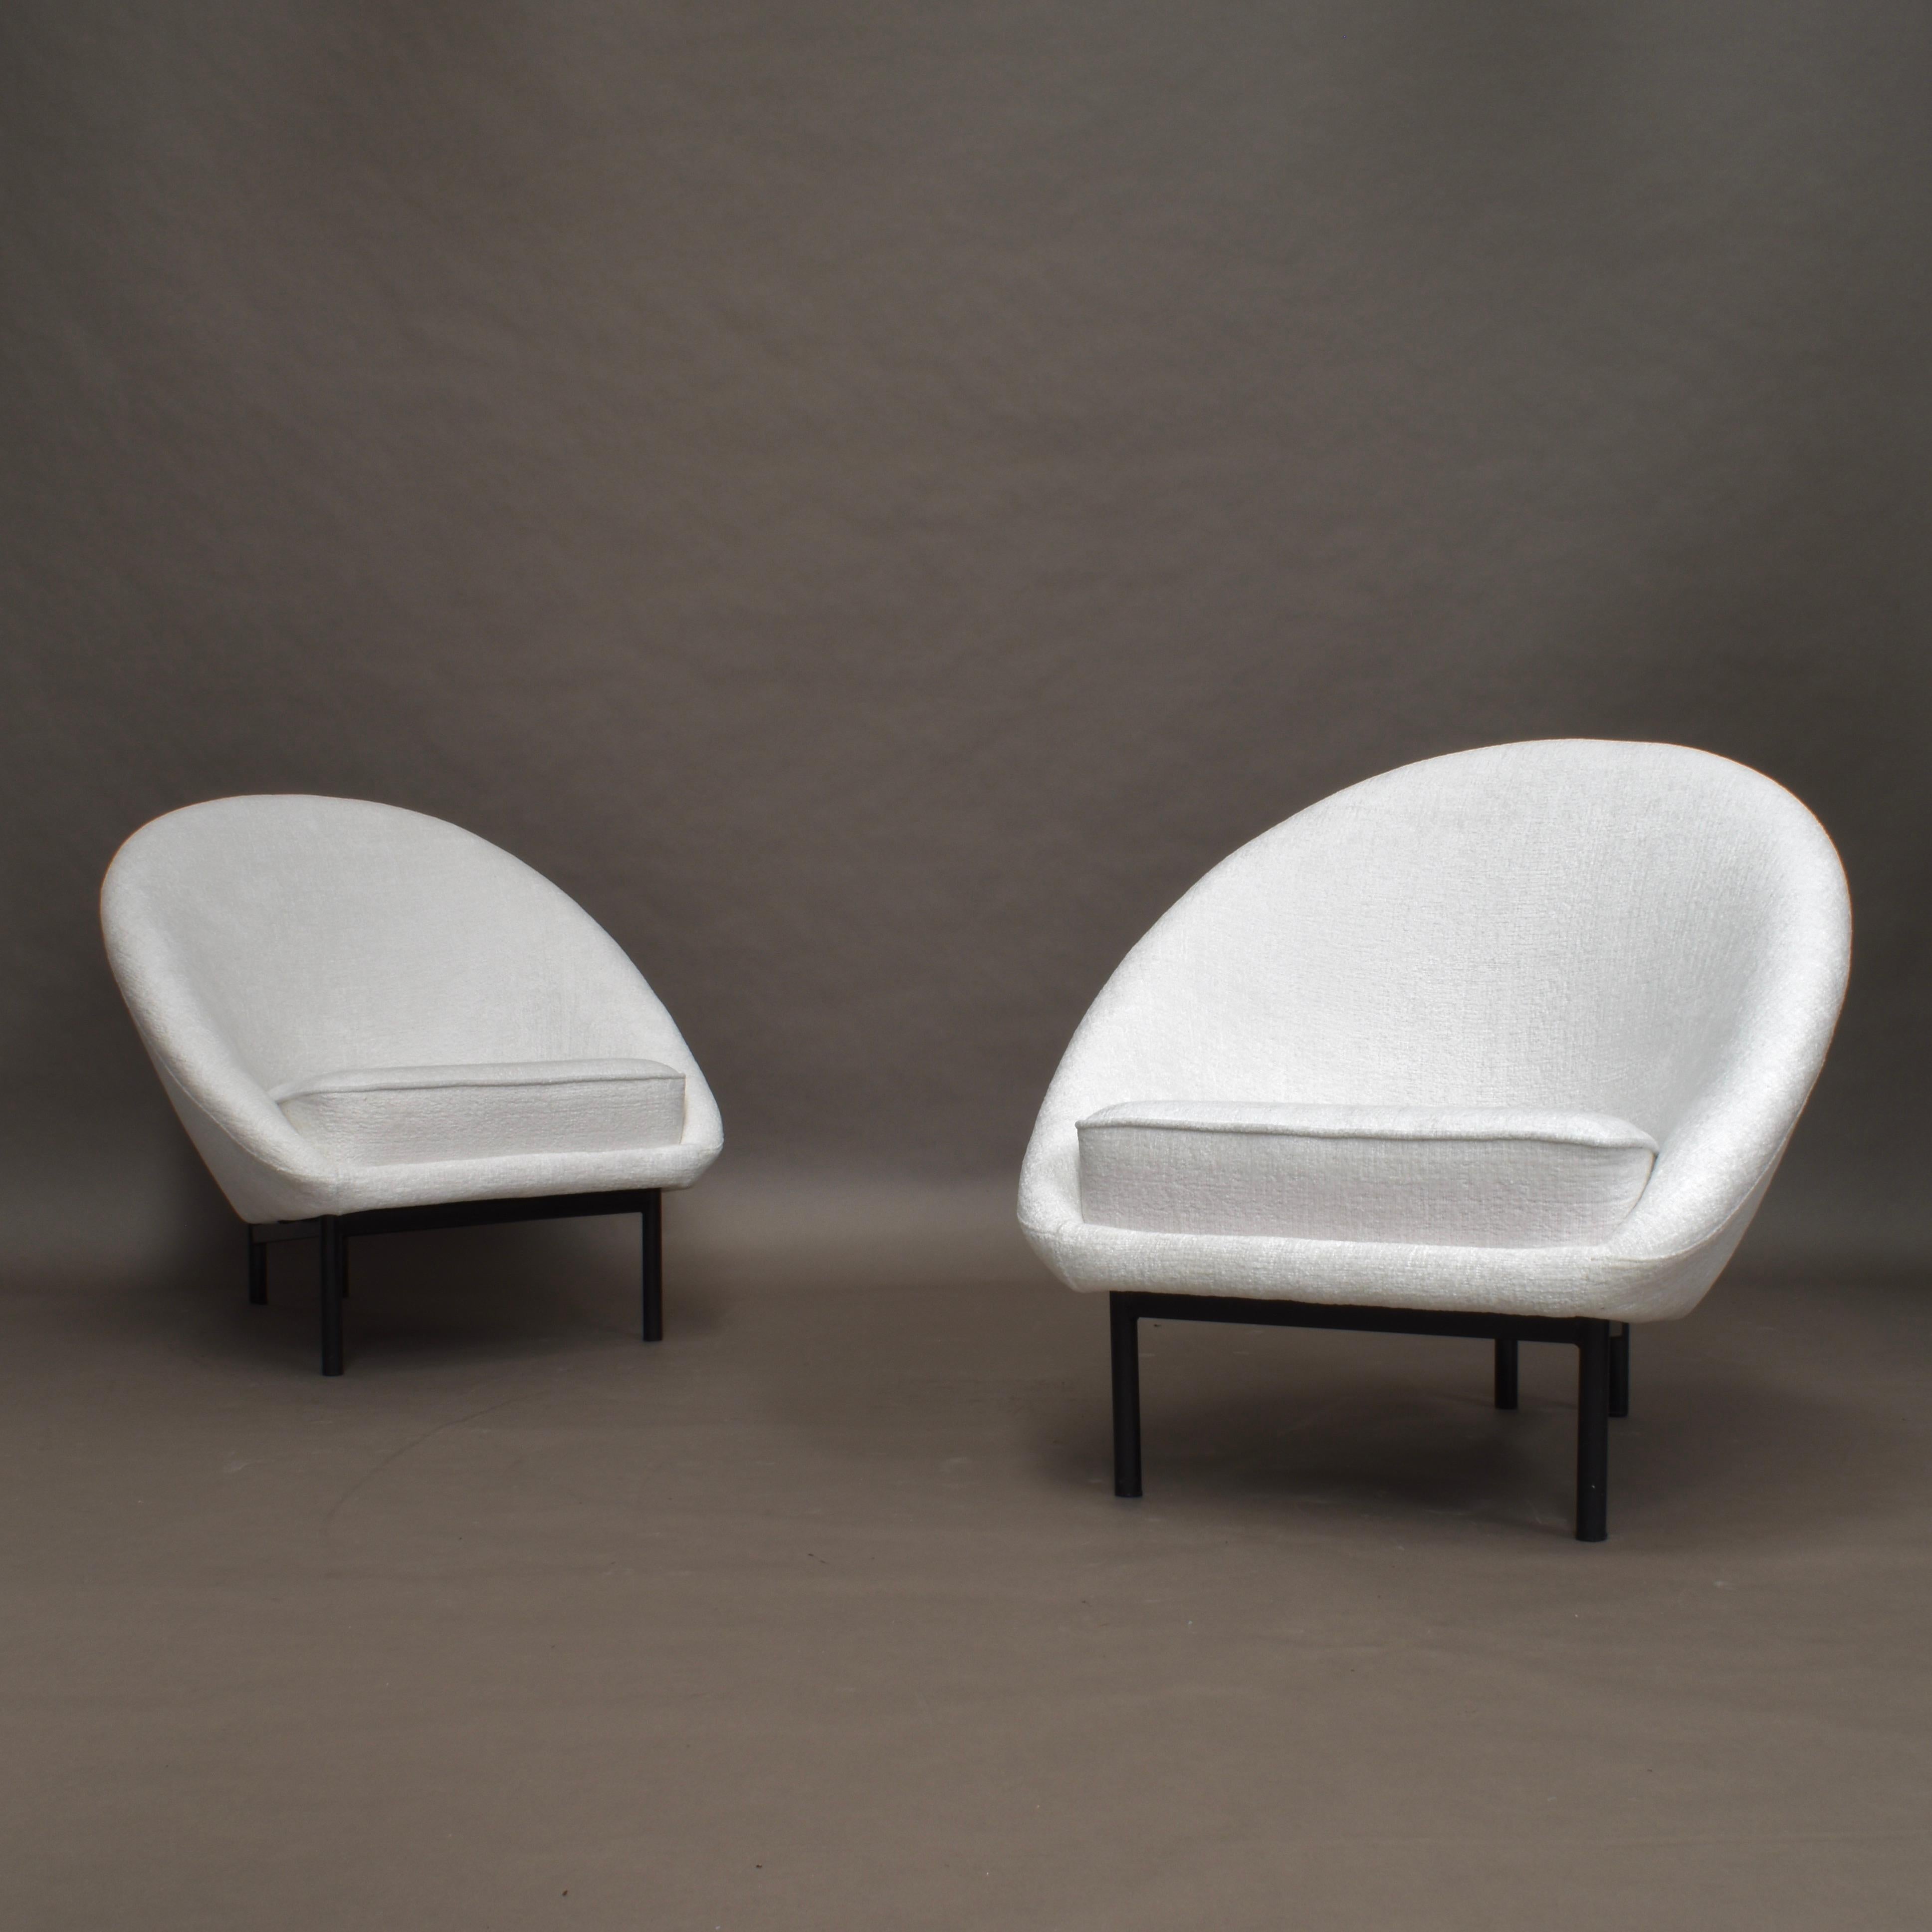 Pair of f115 armchairs by Theo Ruth for Artifort, Netherlands, 1958.
These are rare pieces; amazing and sophisticated center-pieces.

The chairs are reupholstered in a high quality off-white fabric with new foam interior and new support straps.